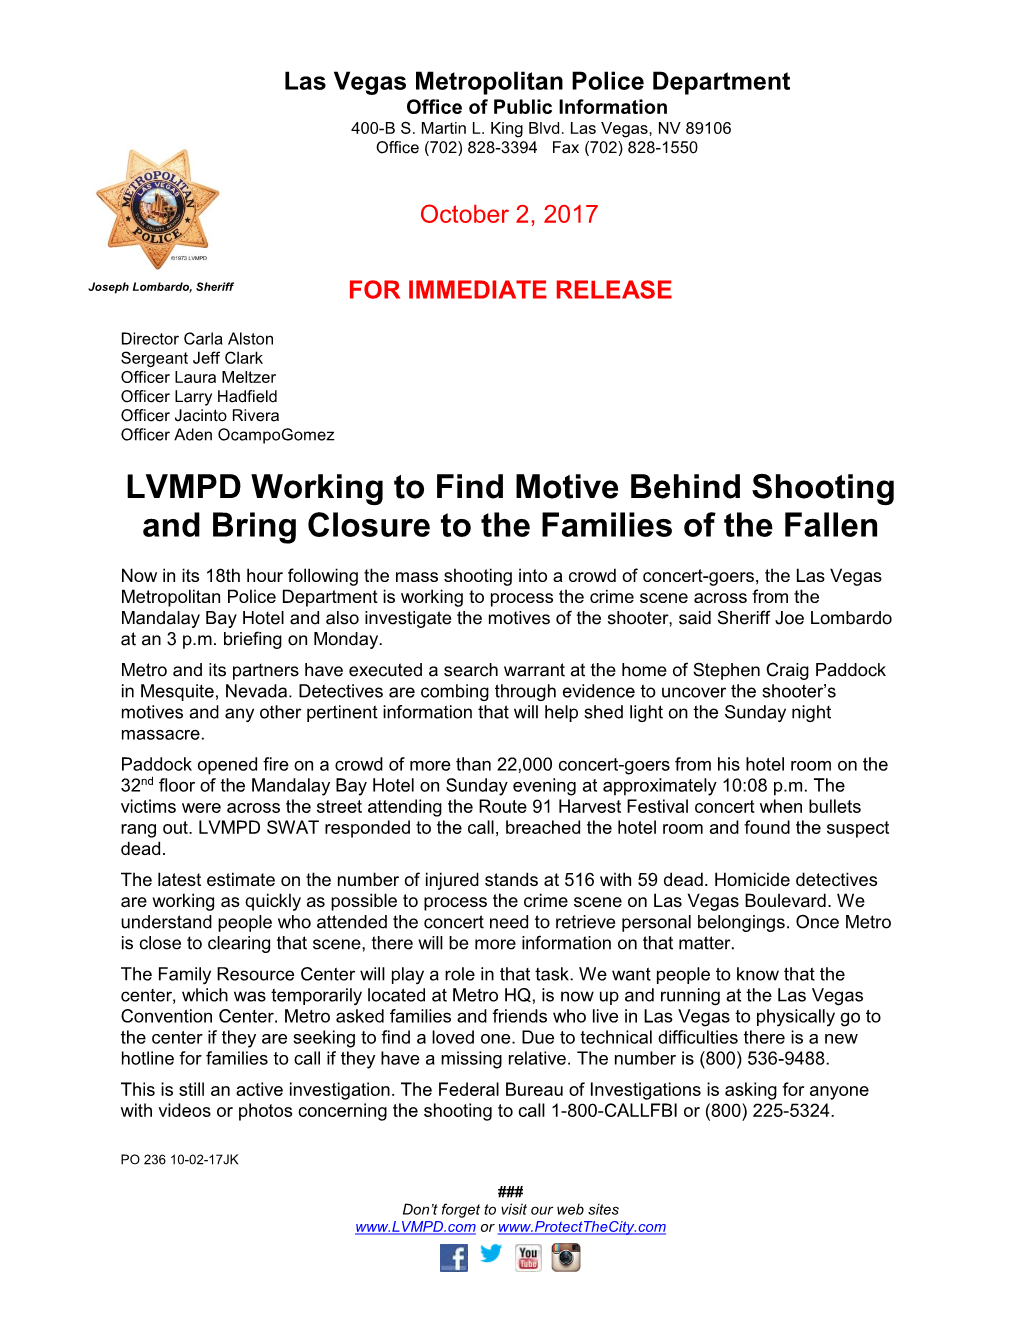 LVMPD Working to Find Motive Behind Shooting and Bring Closure to the Families of the Fallen